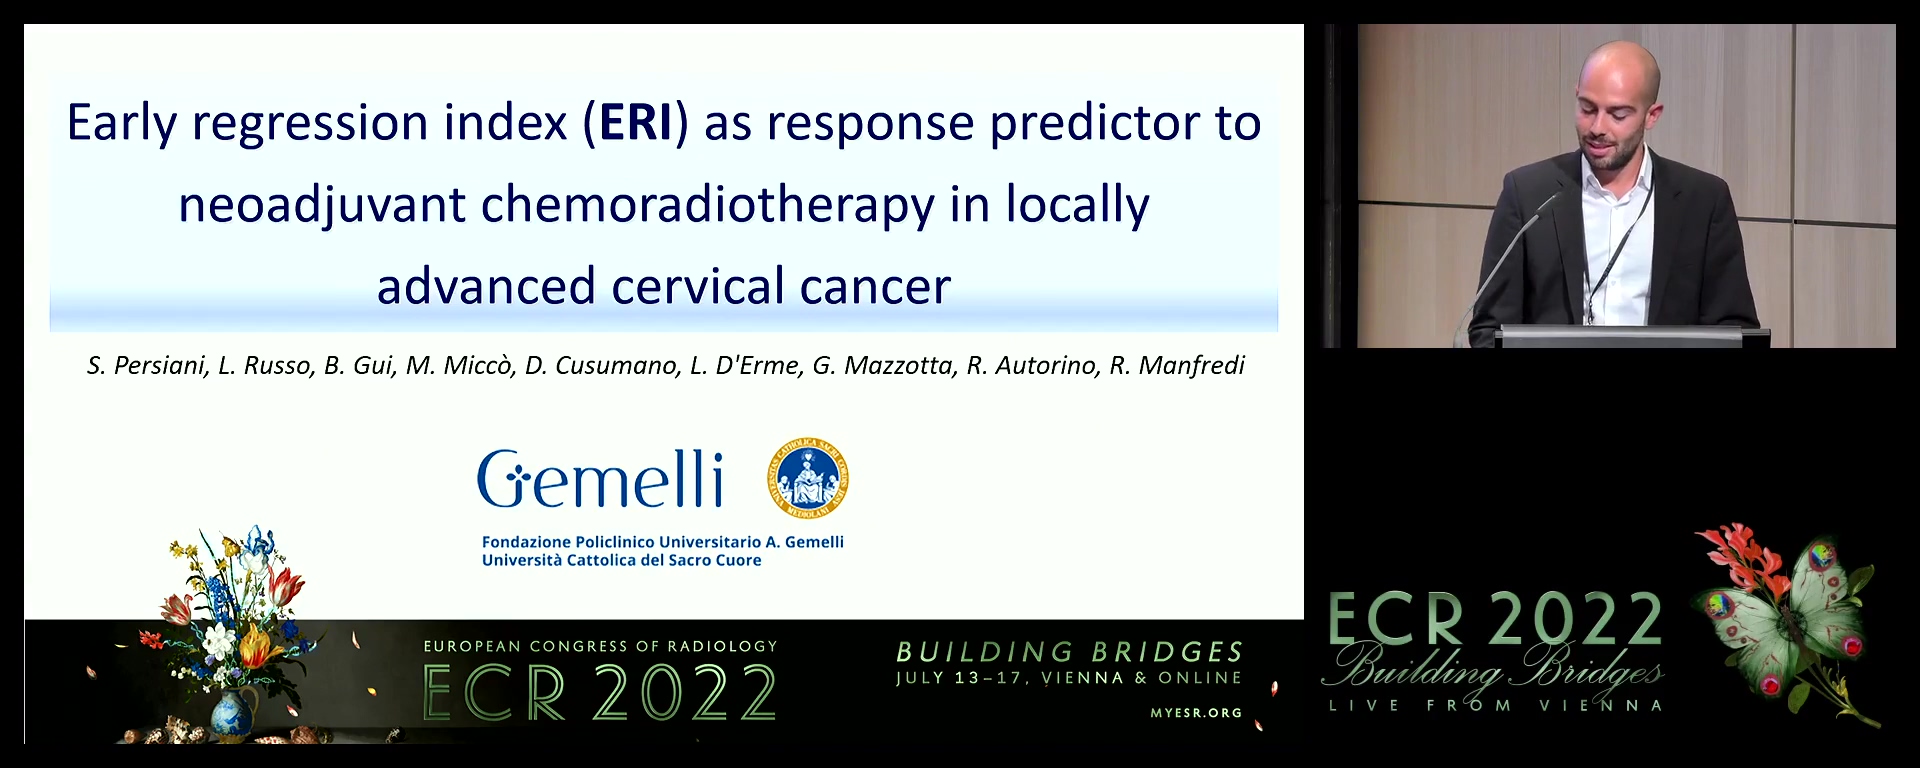 Early regression index (ERI) as response predictor to neoadjuvant chemoradiotherapy in locally advanced cervical cancer - Salvatore Persiani, Policoro / IT